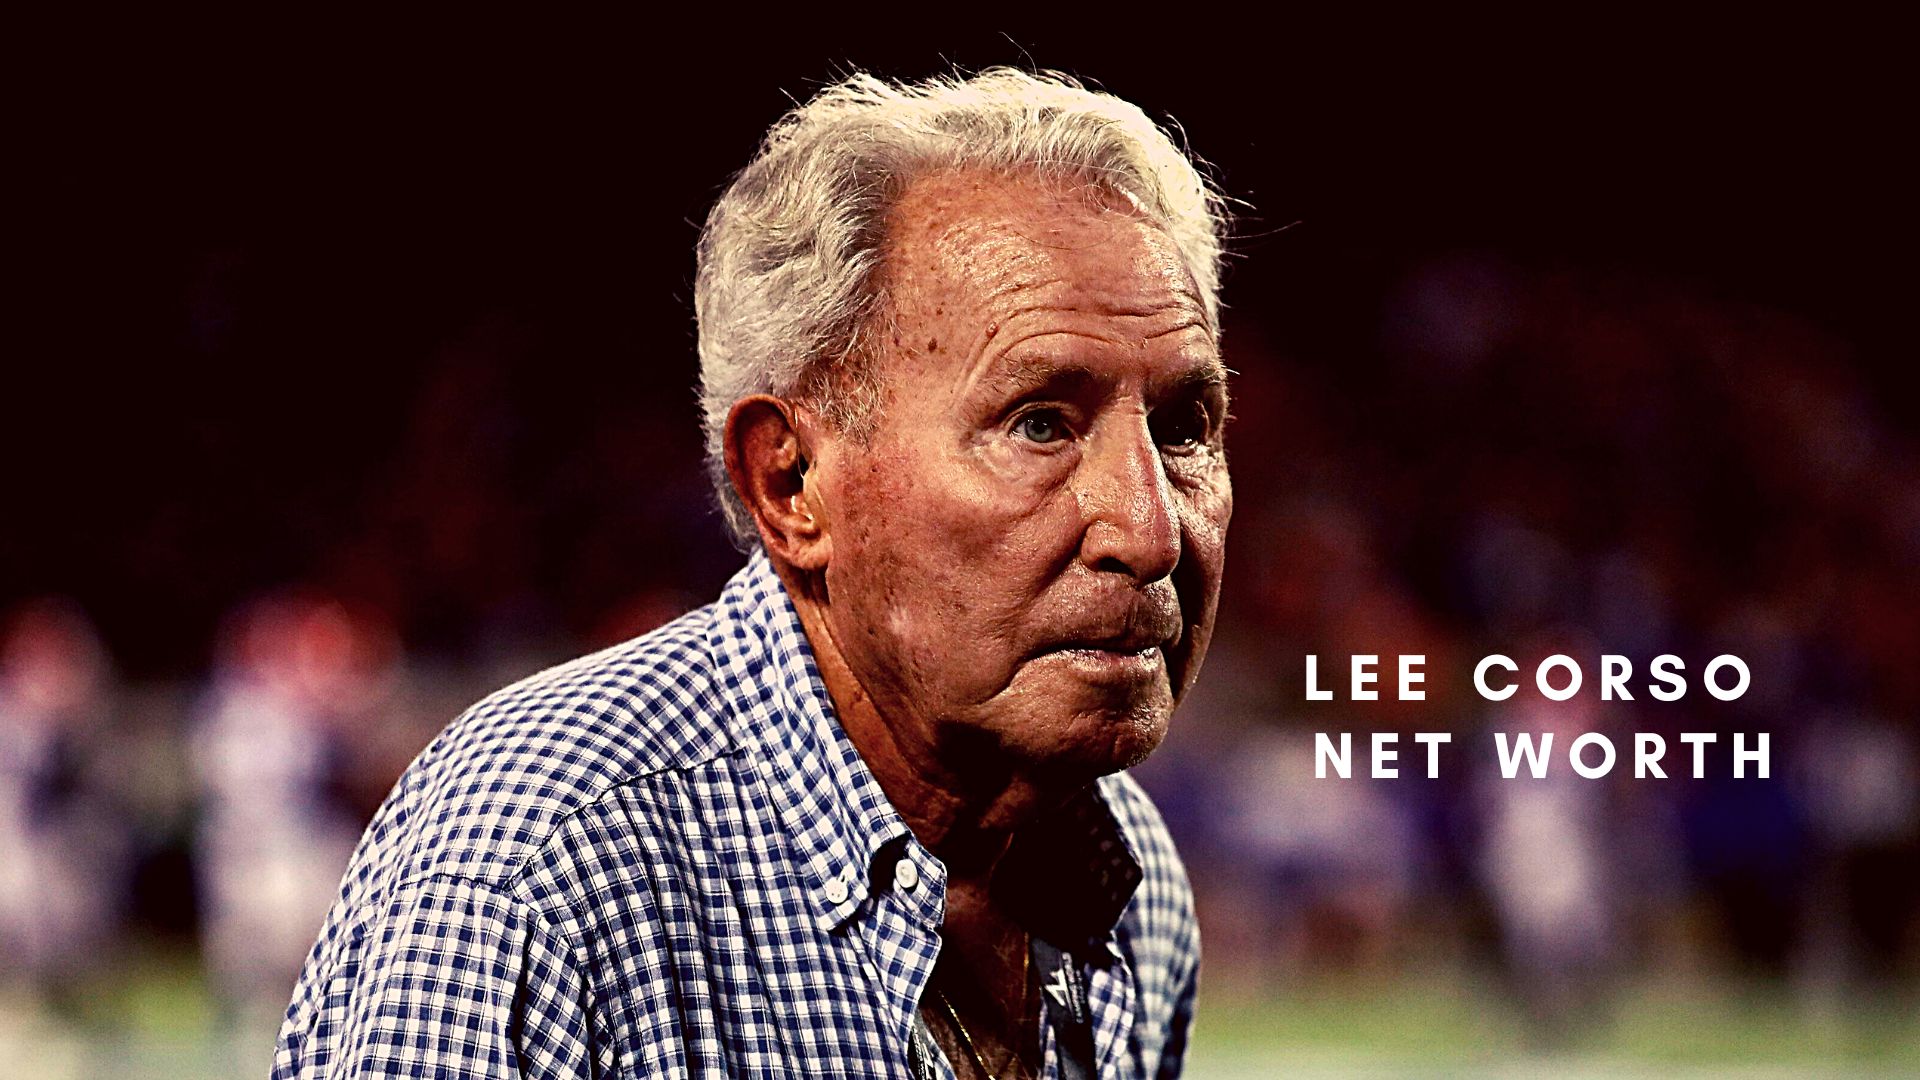 Lee Corso 2023 -Net Worth, Salary, Records, and Personal Life